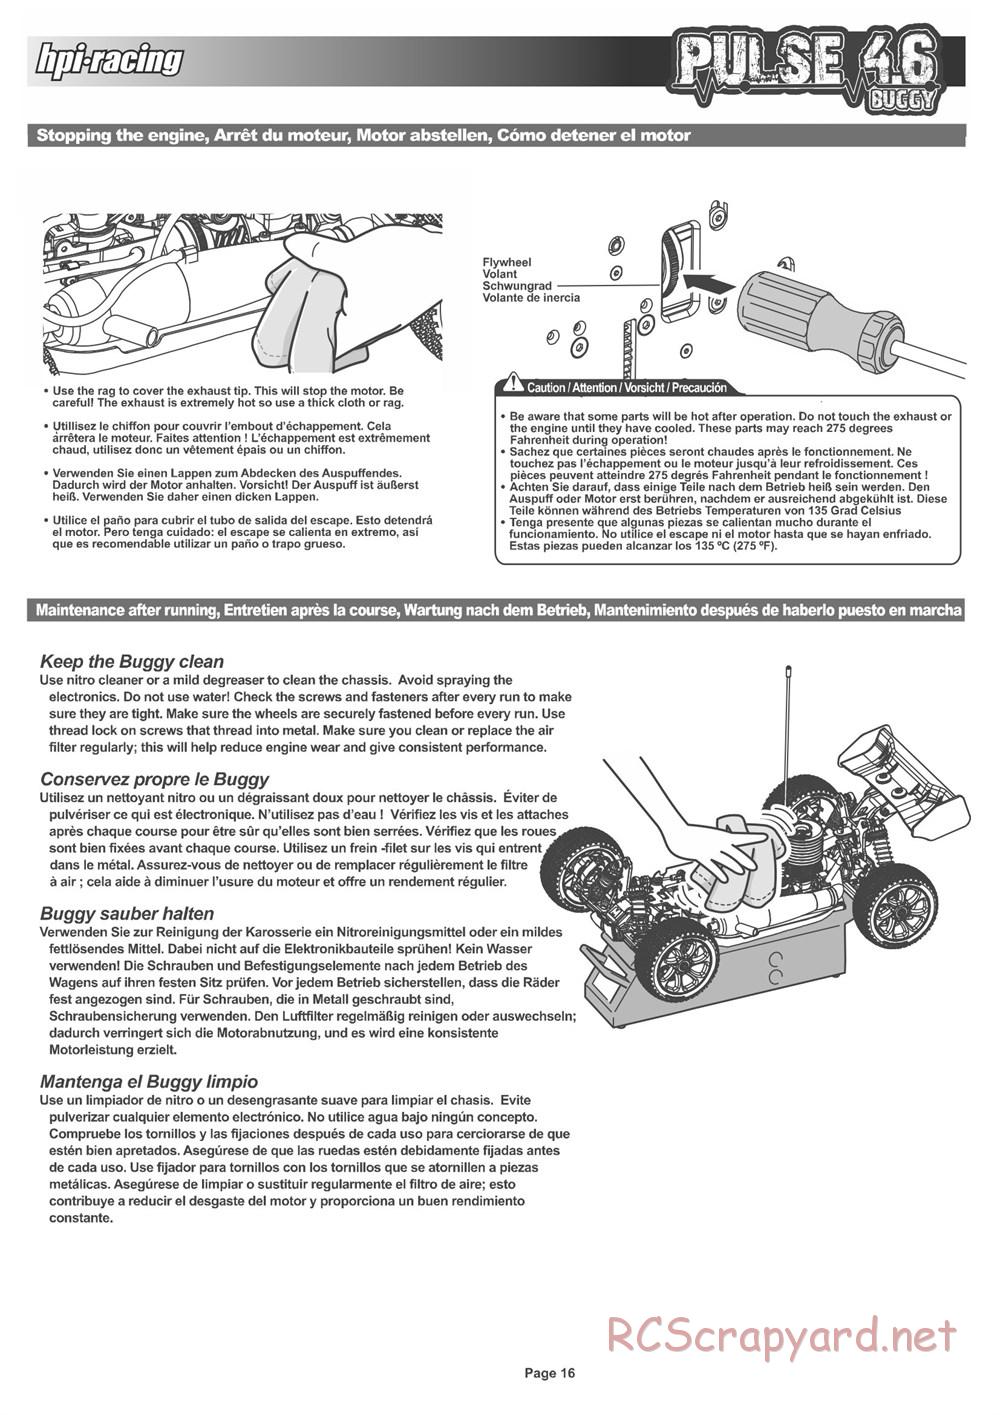 HPI - Pulse 4.6 Buggy - Manual - Page 16